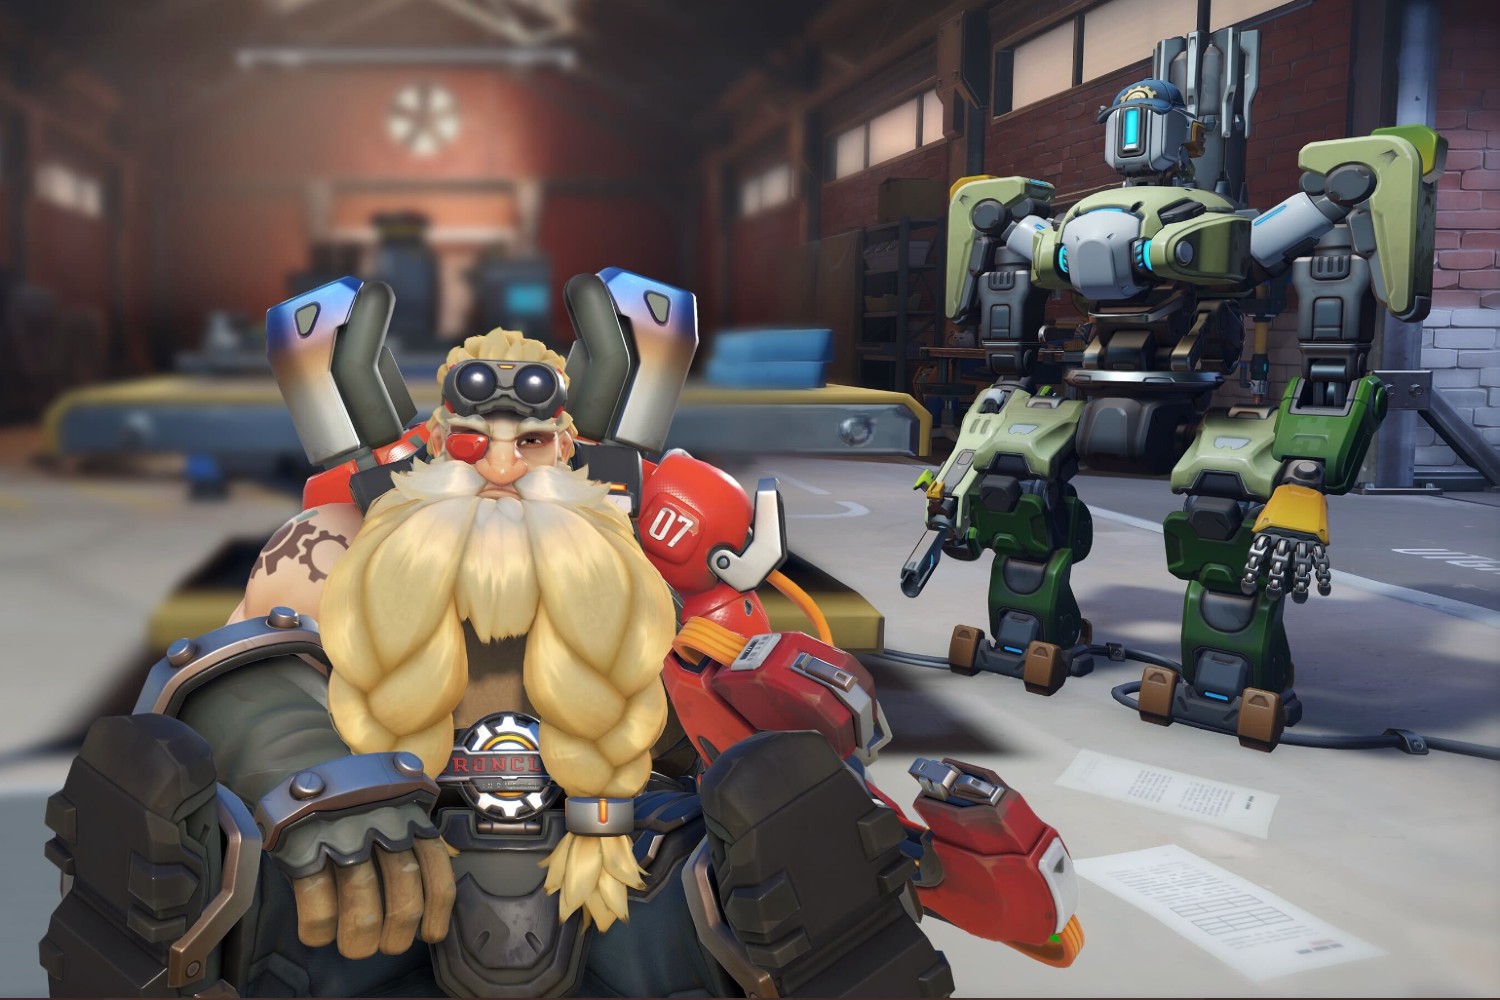 Bastion and Torbjorn sit in the workshop in Overwatch 2.